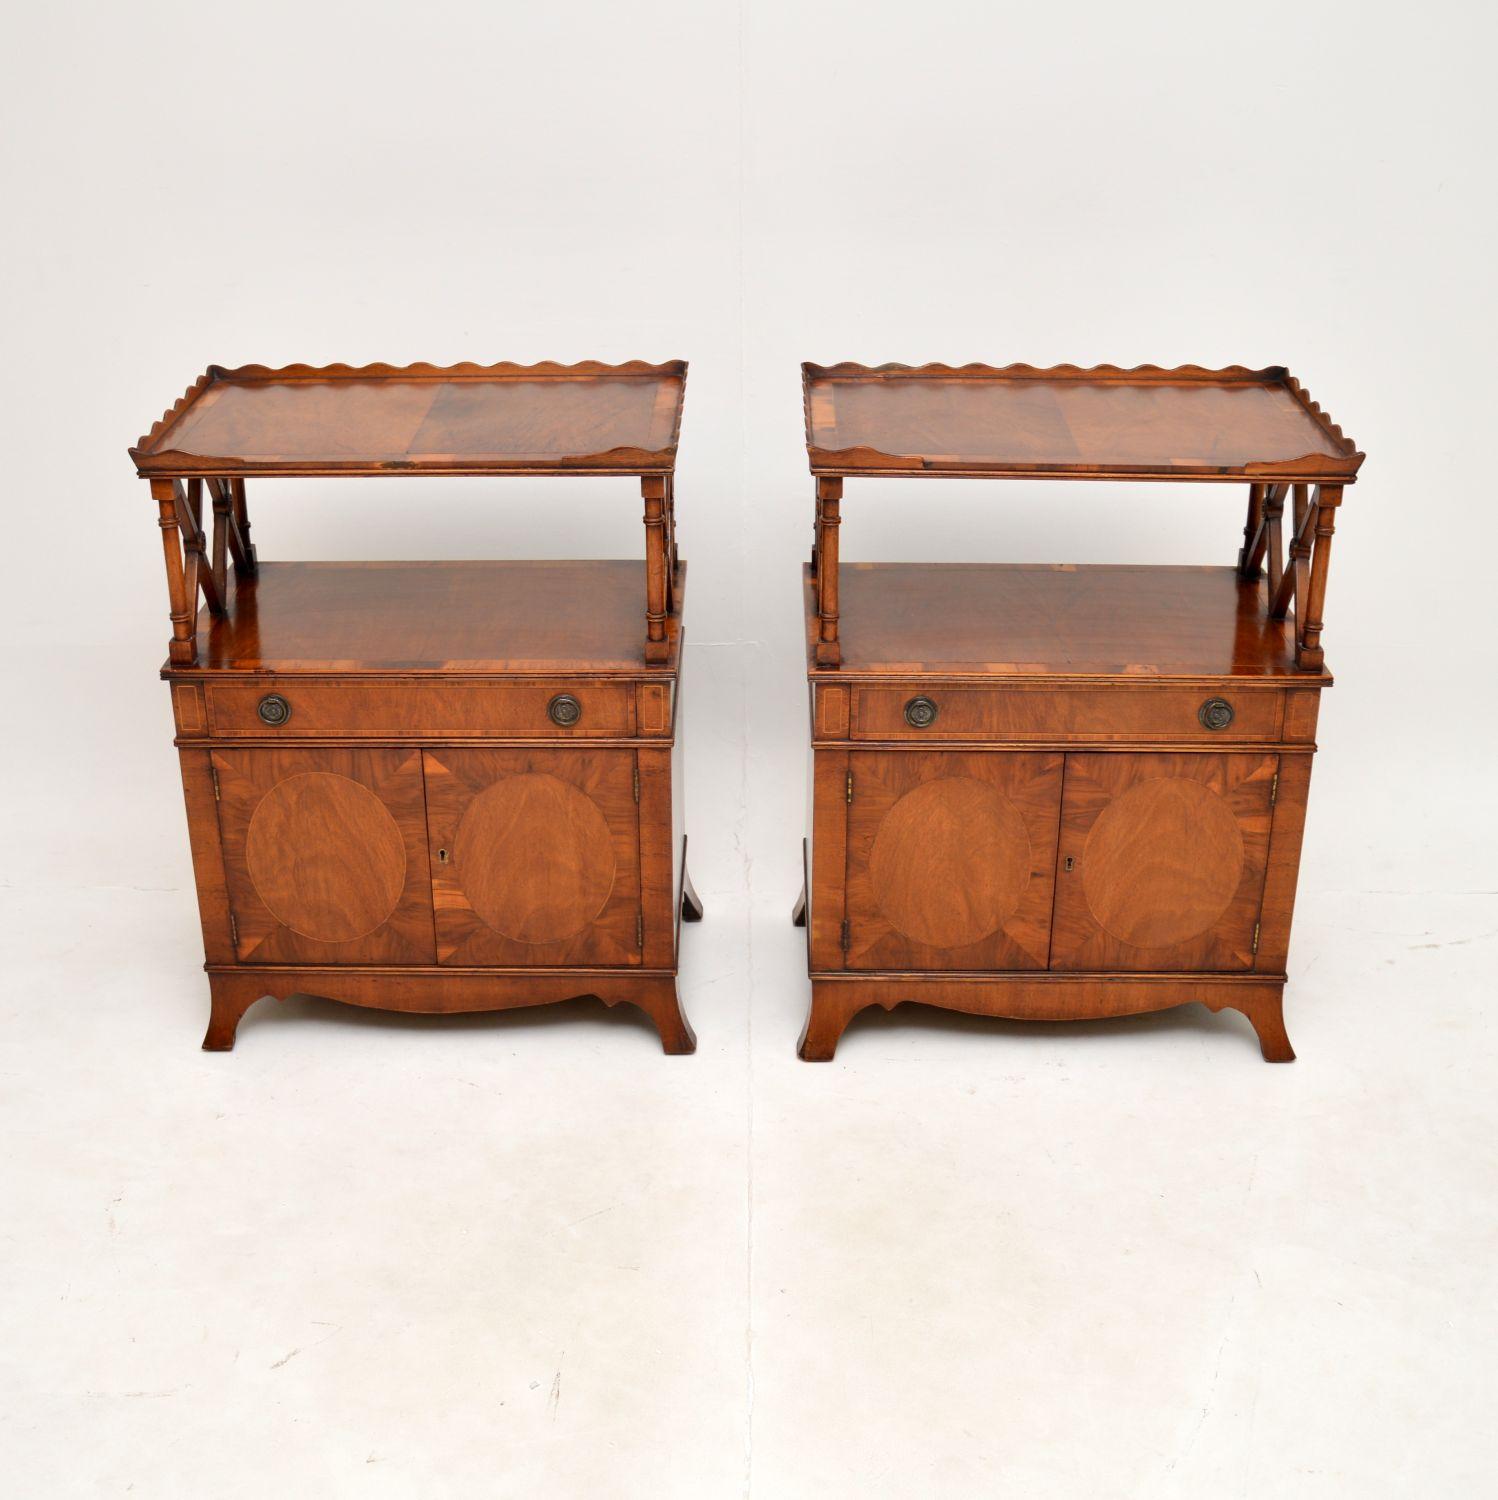 A fantastic pair of antique yew wood side cabinets. They were made in England, they date from around the 1920’s.

The quality is outstanding, they are beautifully designed and are a useful size to be used as bedside cabinets or occasional side